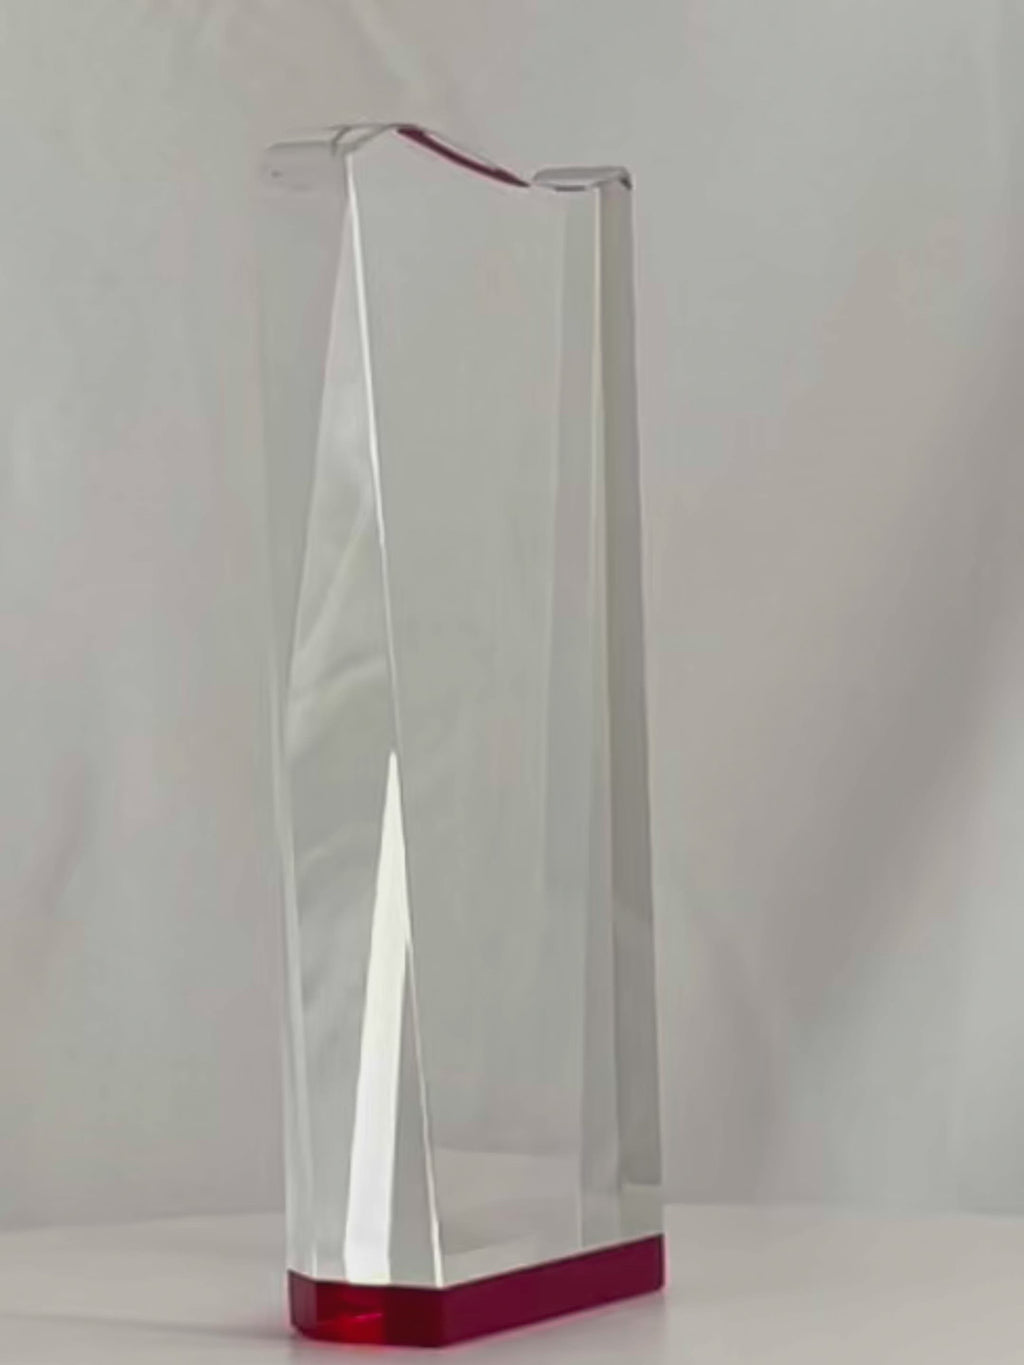 Red Wedge with Wave Crystal Award